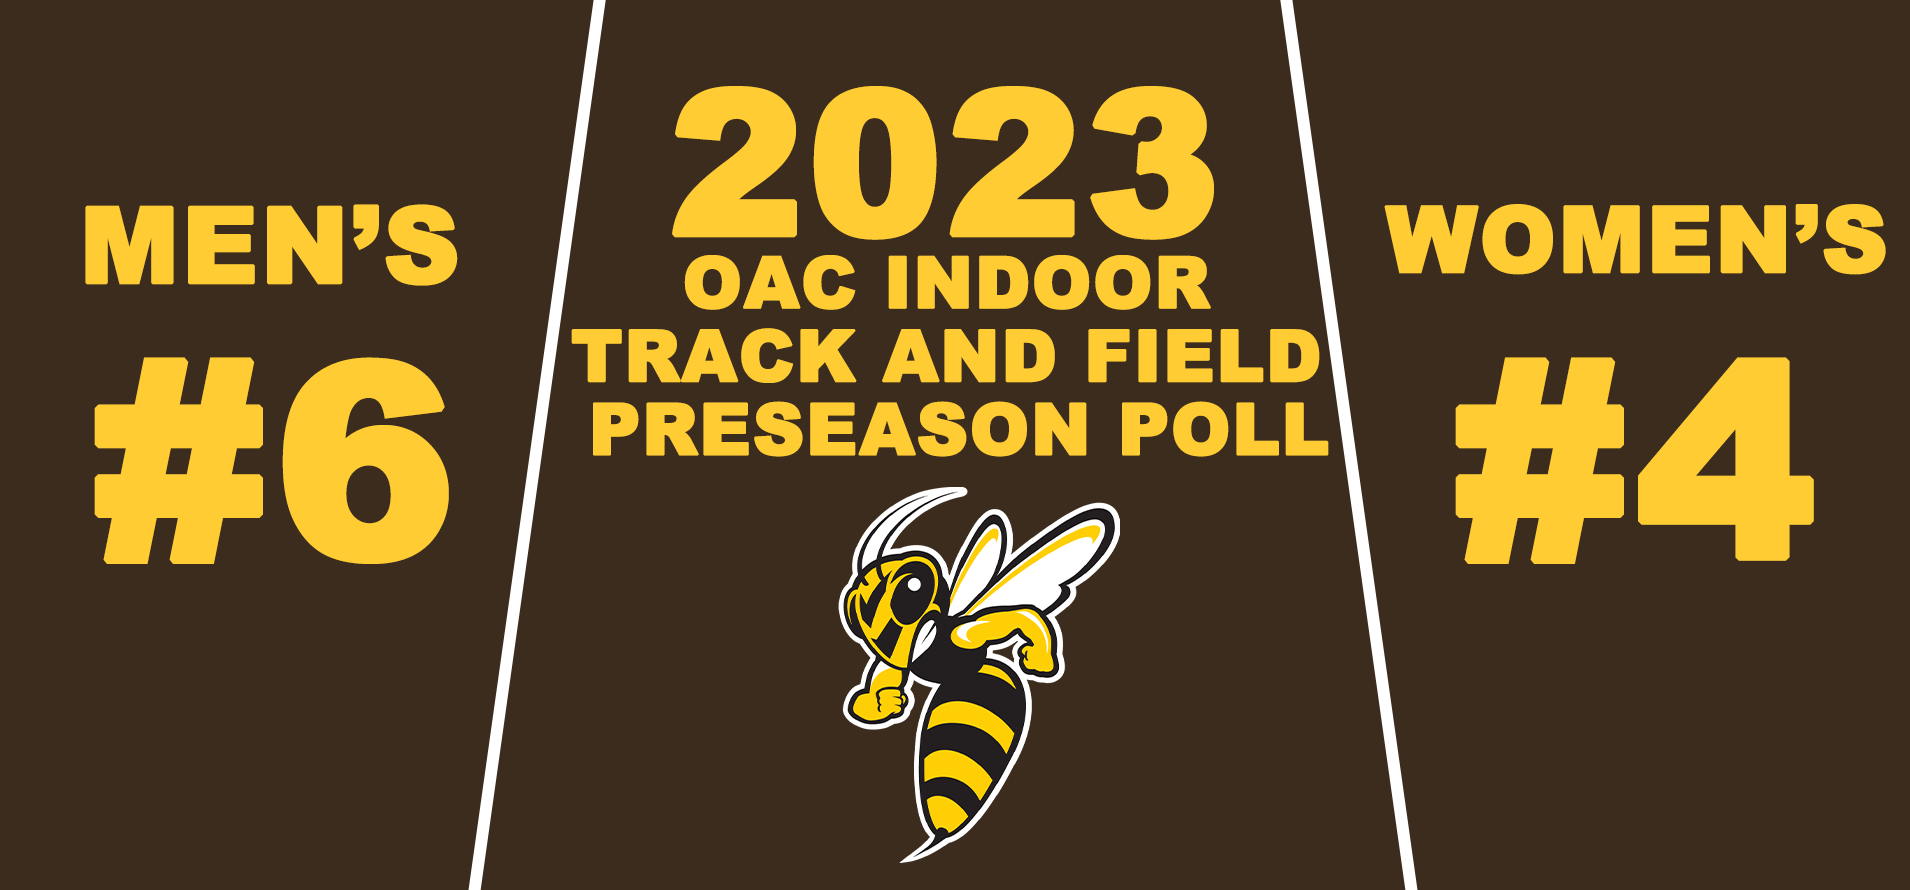 Women Selected Fourth, Men Picked Sixth in 2023 OAC Indoor Track and Field Preseason Poll